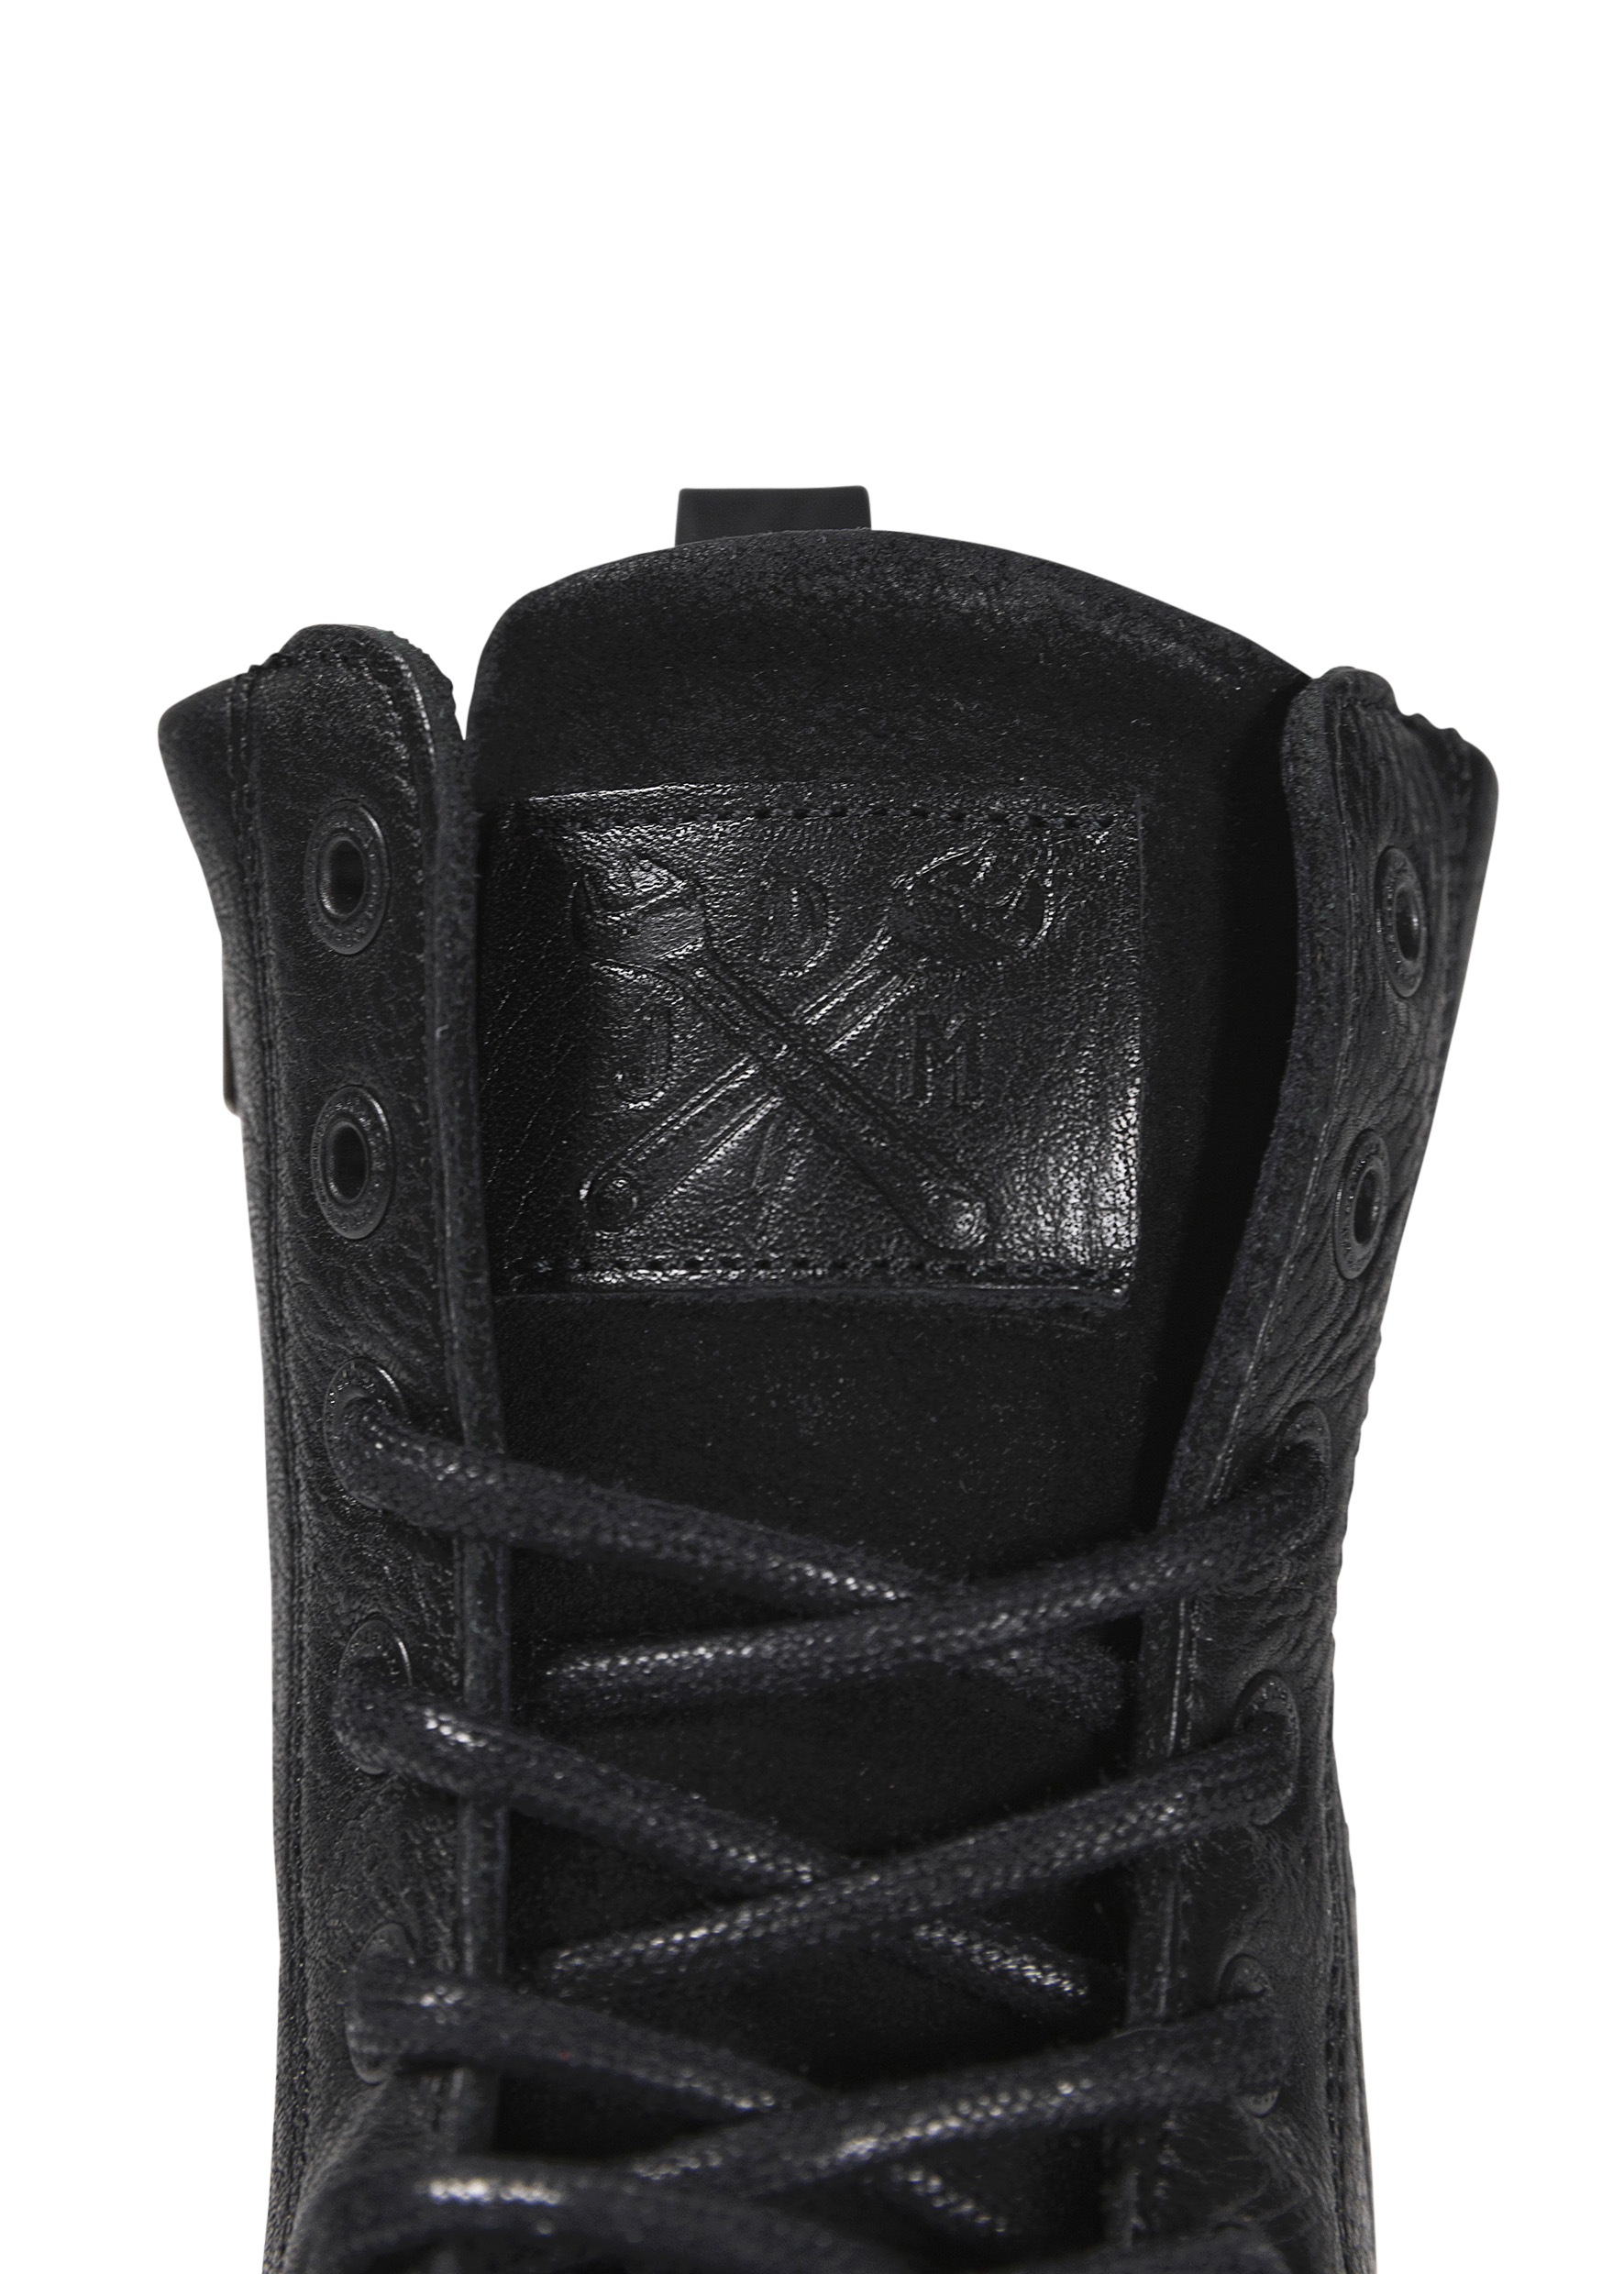 SIXTY RIDING BOOTS BUDAPEST | BLACK